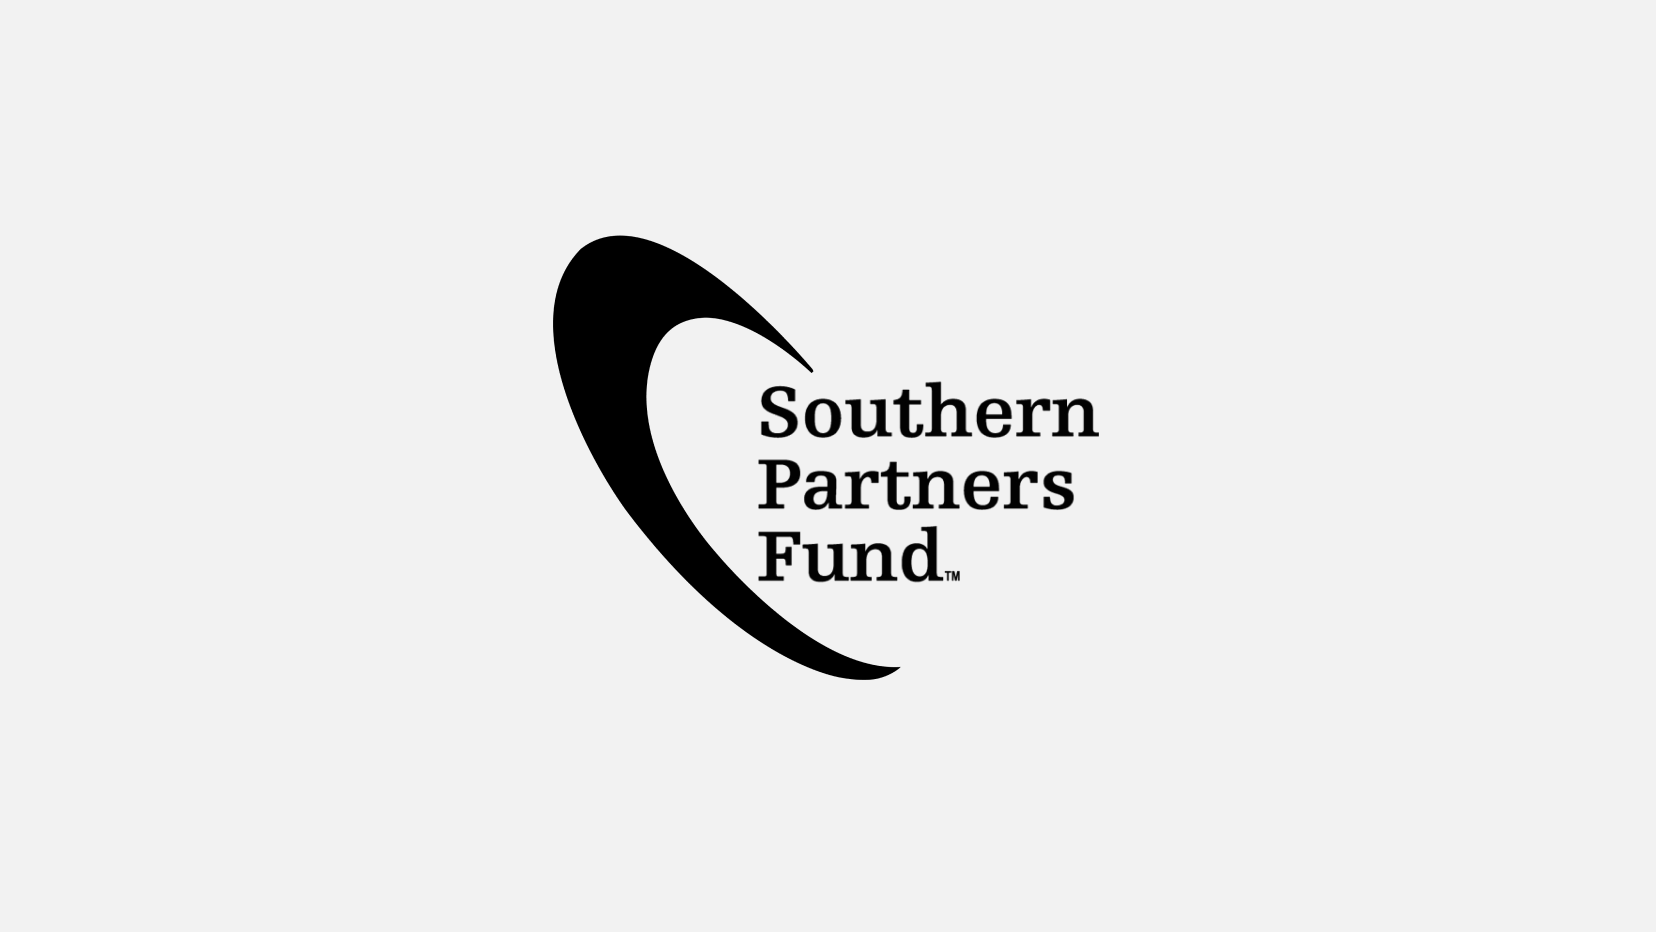 Southern Partners Fund logo